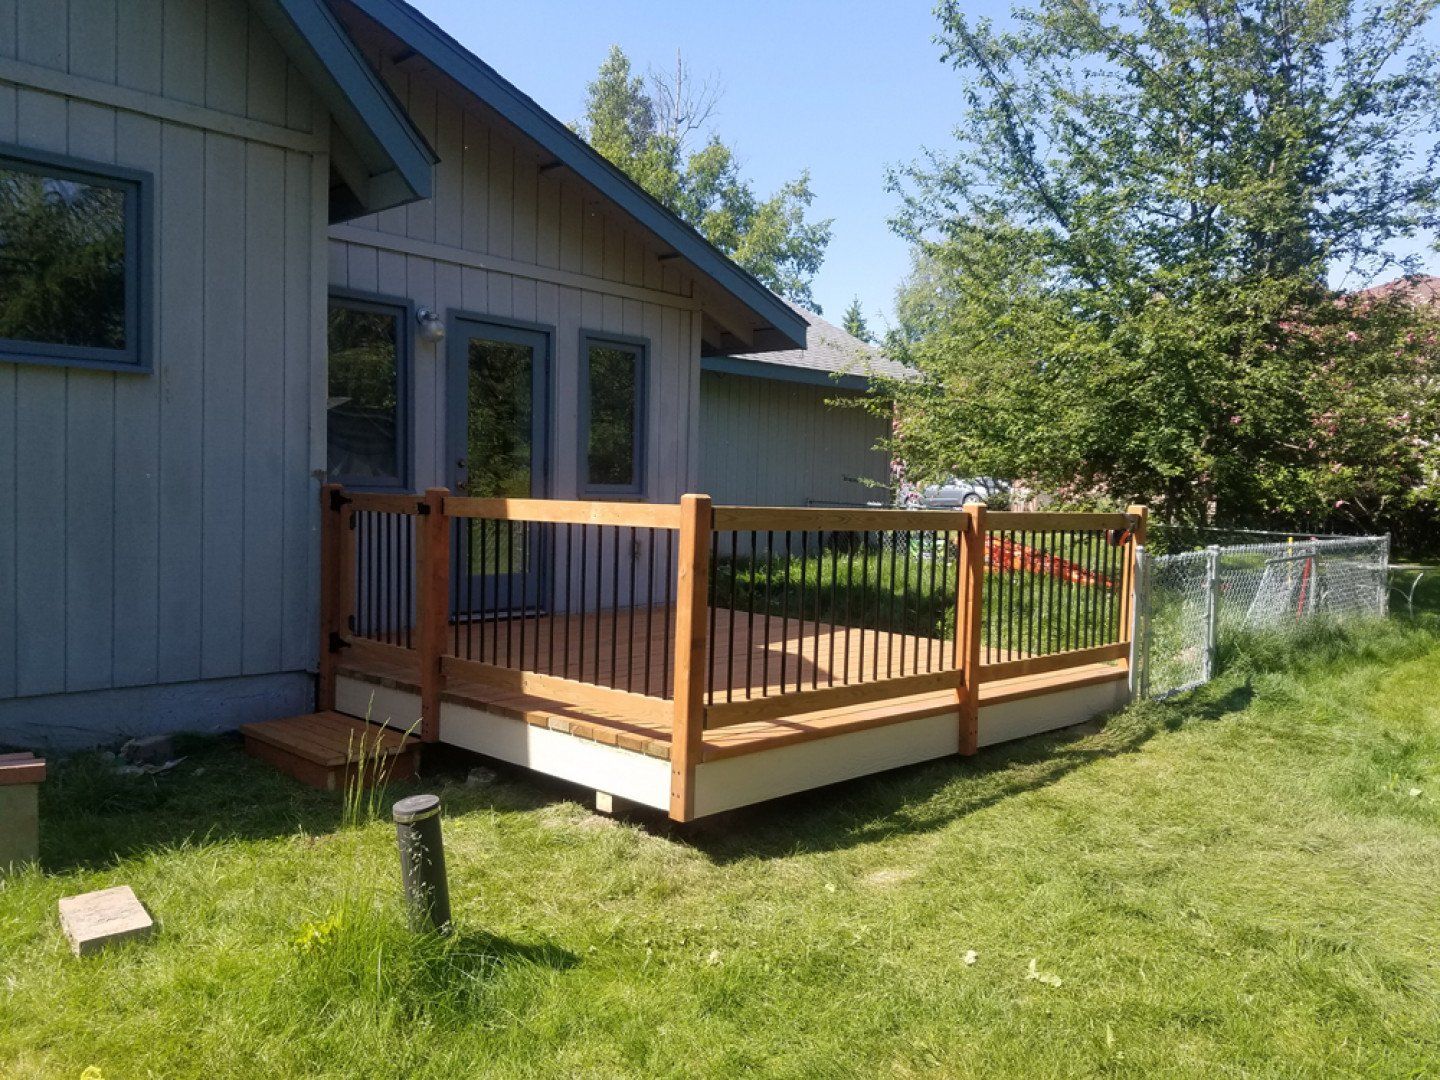 House Deck Home For Sale Repairs